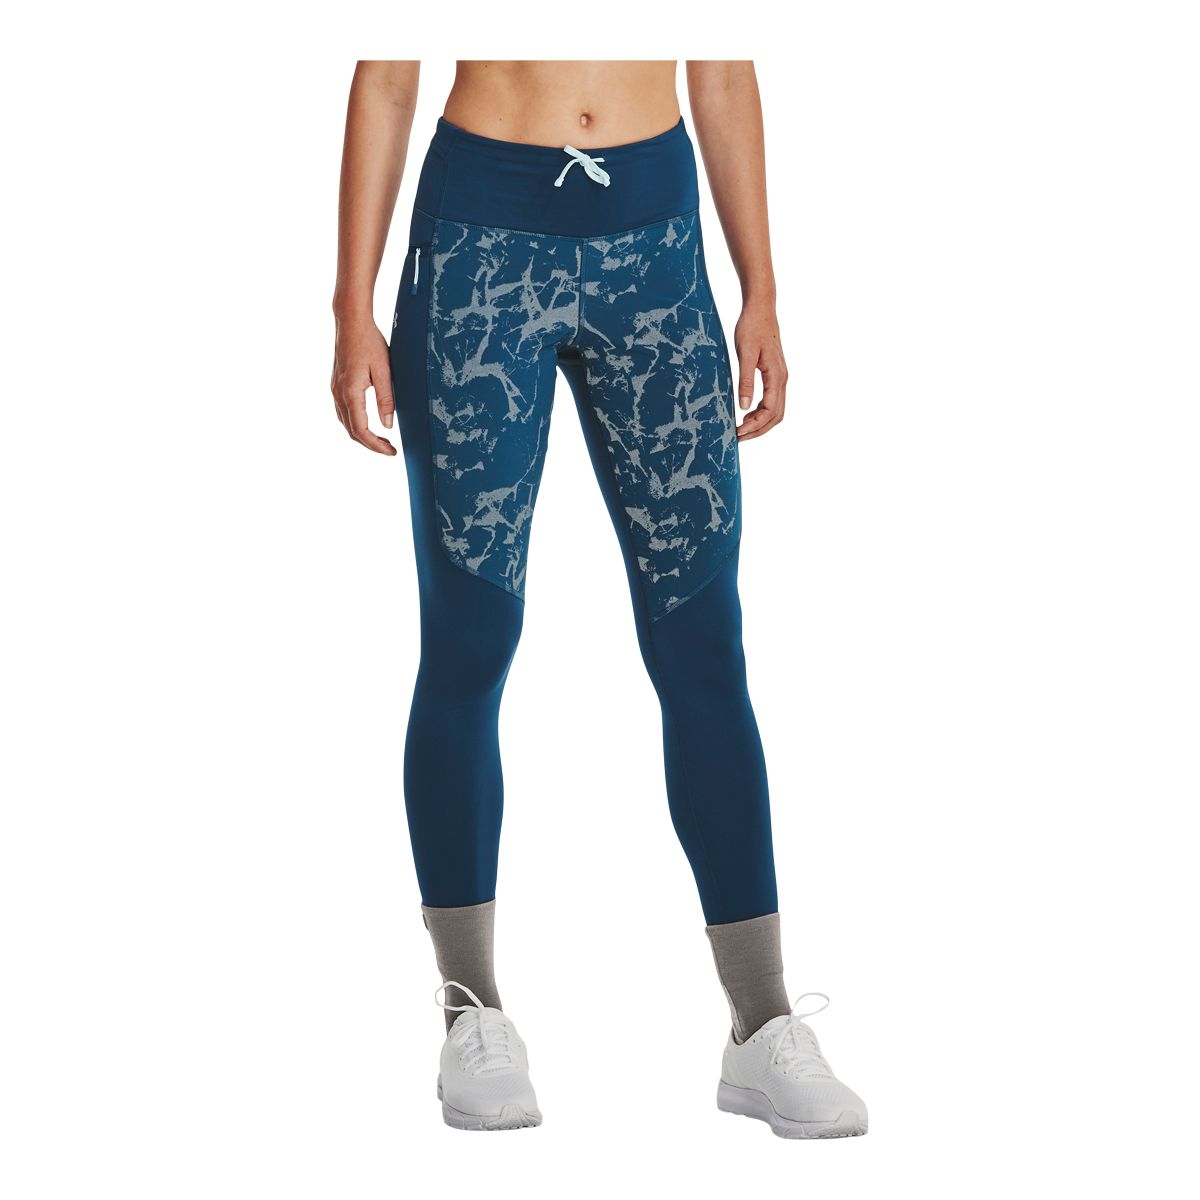 Under Armour Women's Run Out The Cold Print Tights